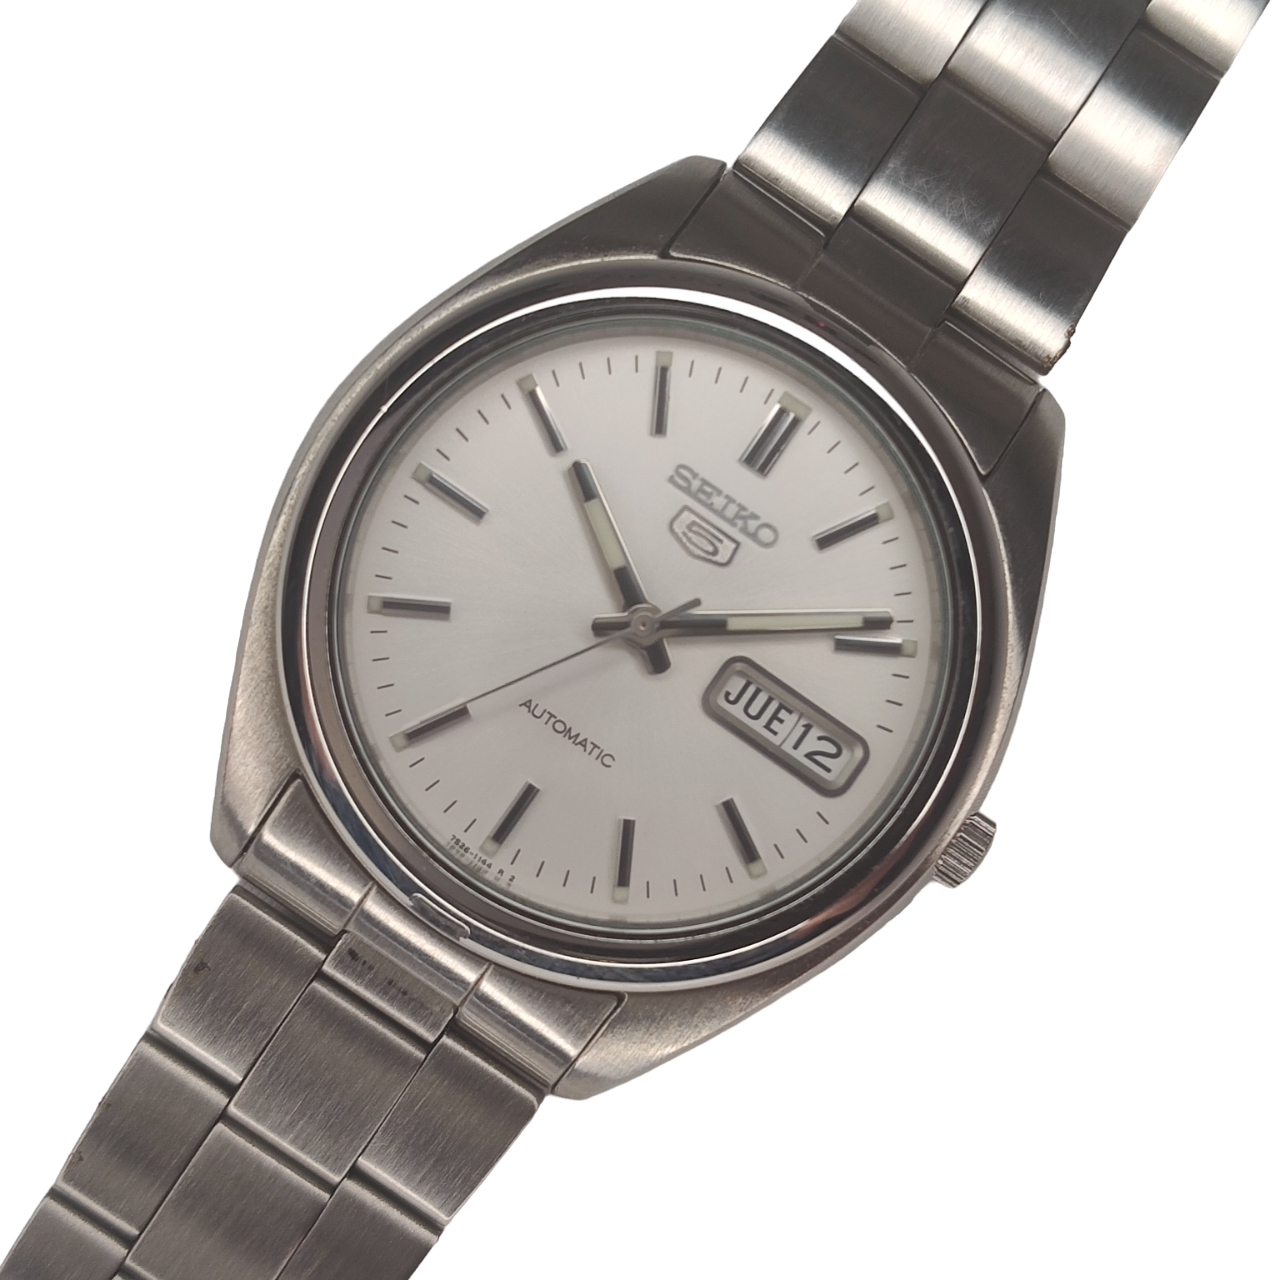 Seiko 5 Automatic 7S26-0440 Day & Date Box – Temple of Time